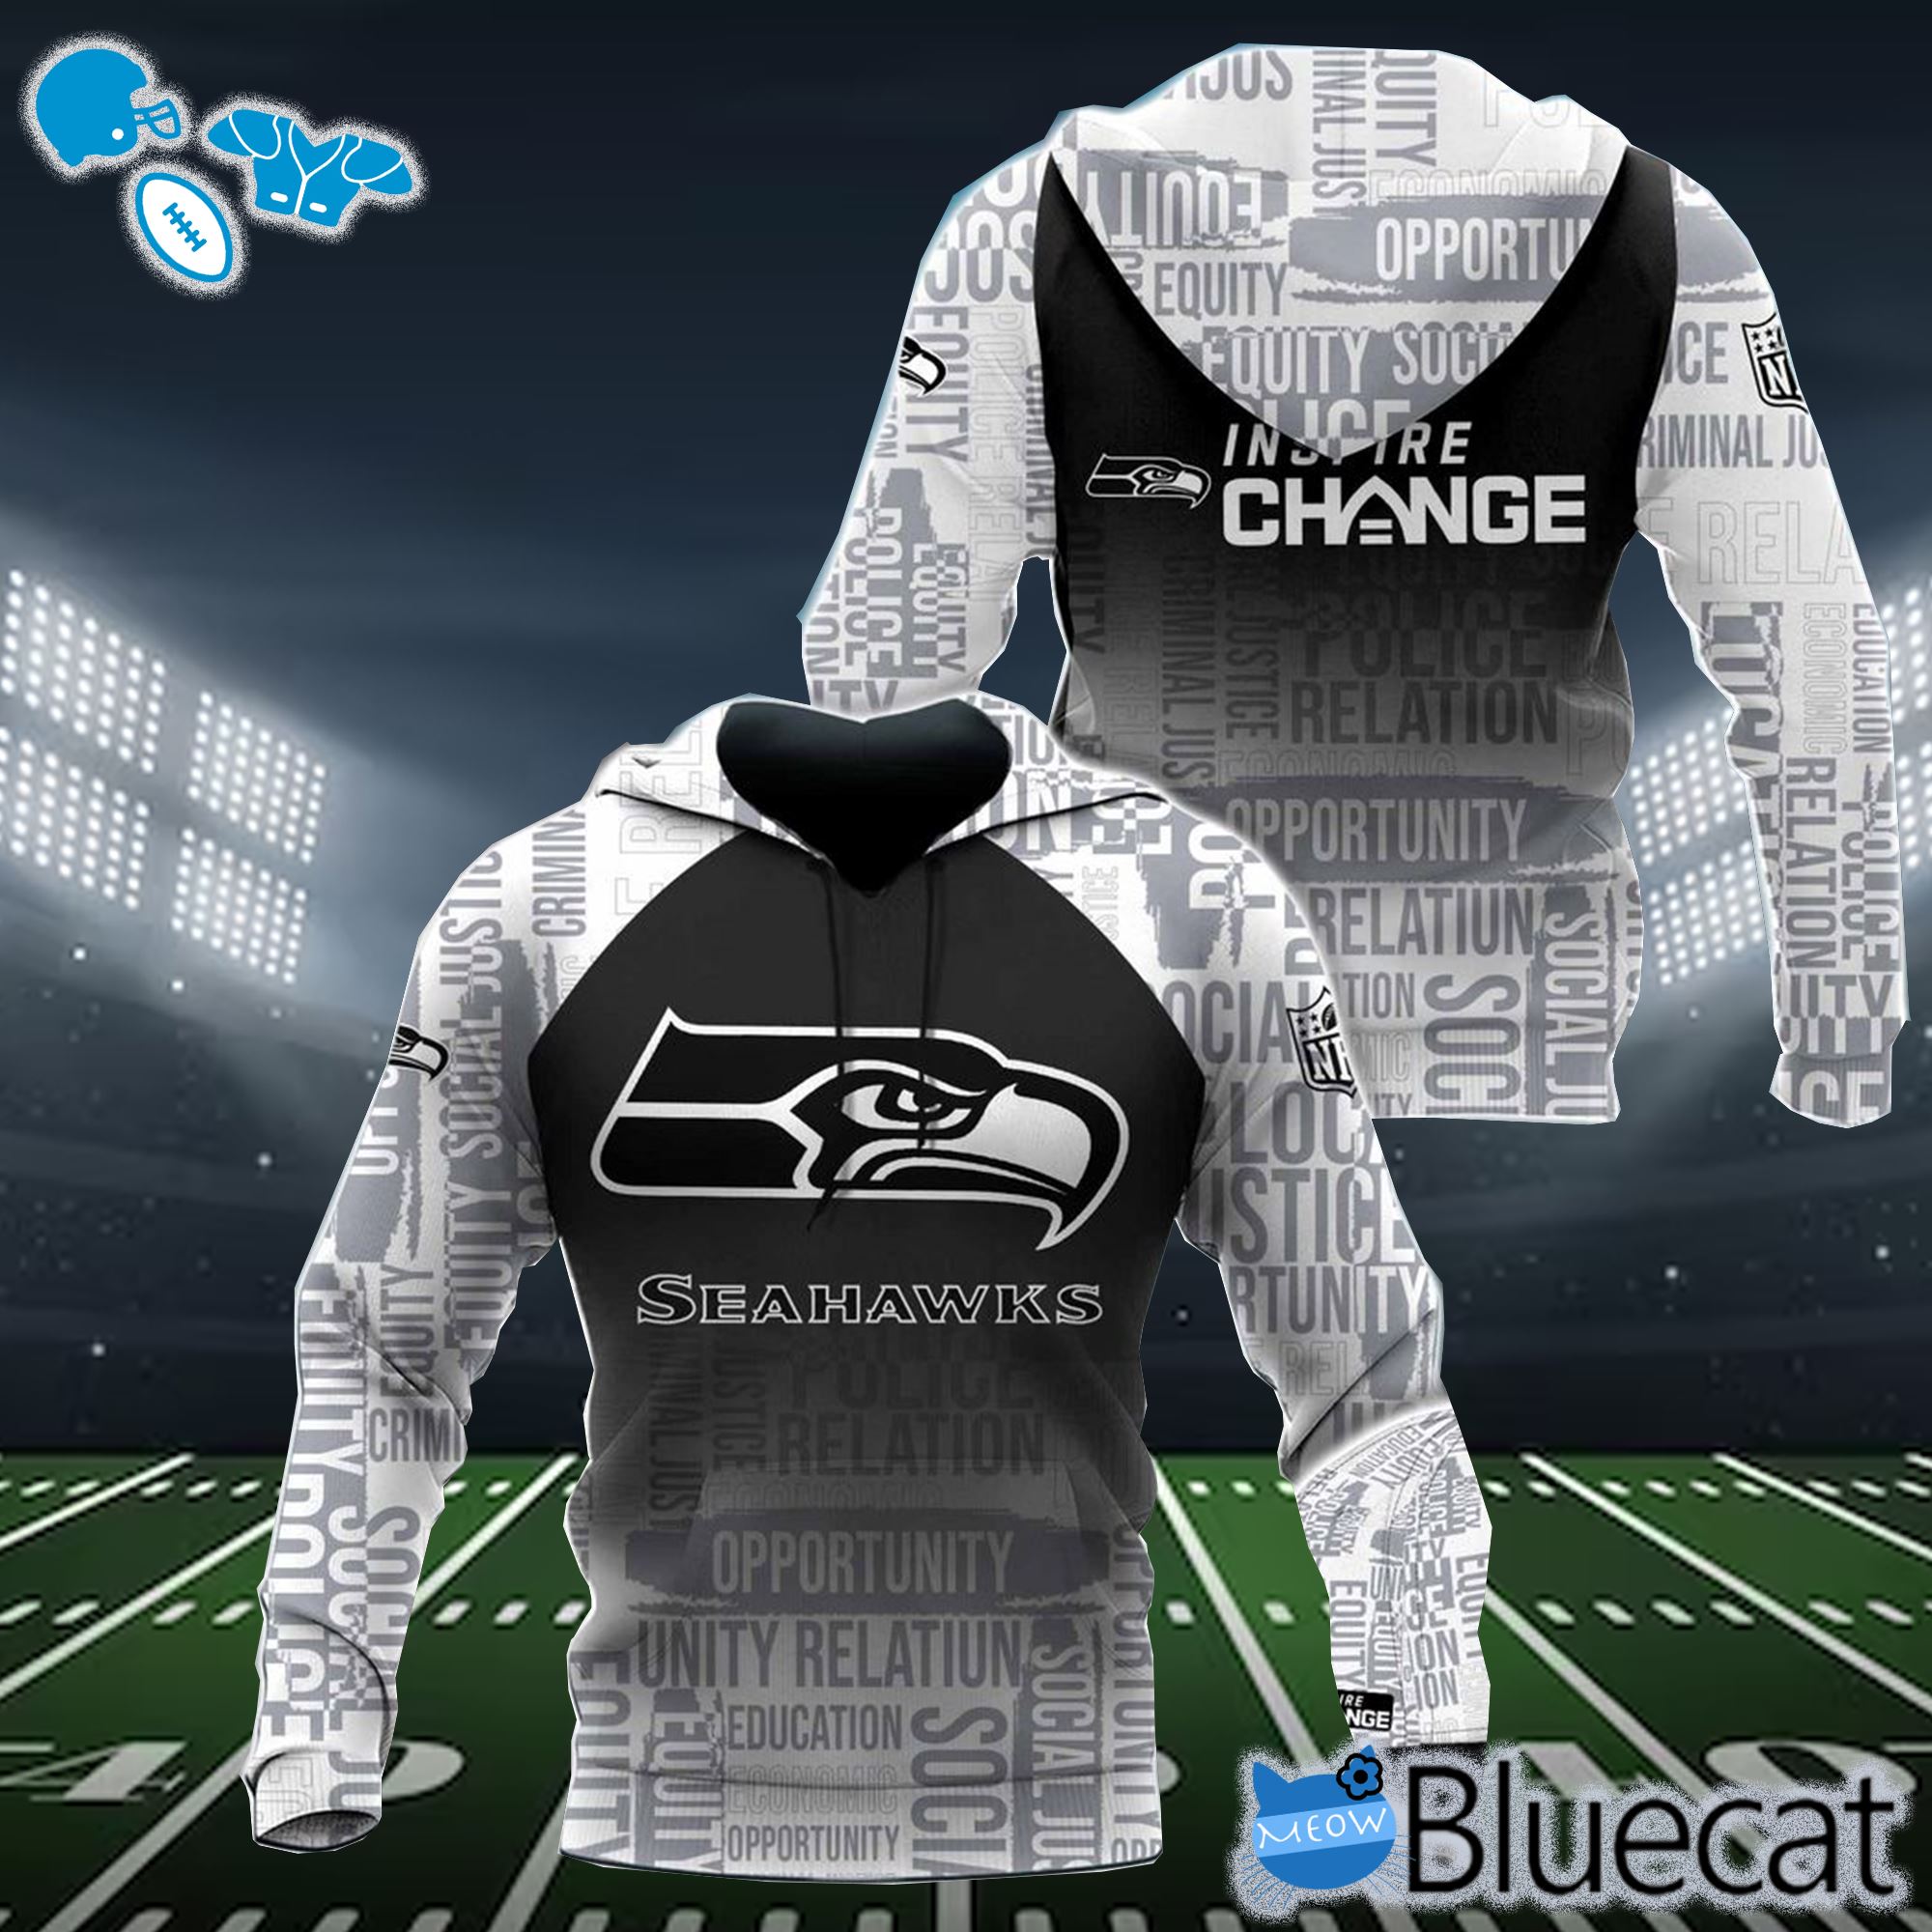 nfl seattle seahawks inspire change opportunity education economic community police relations criminal justice hoodie 1 1